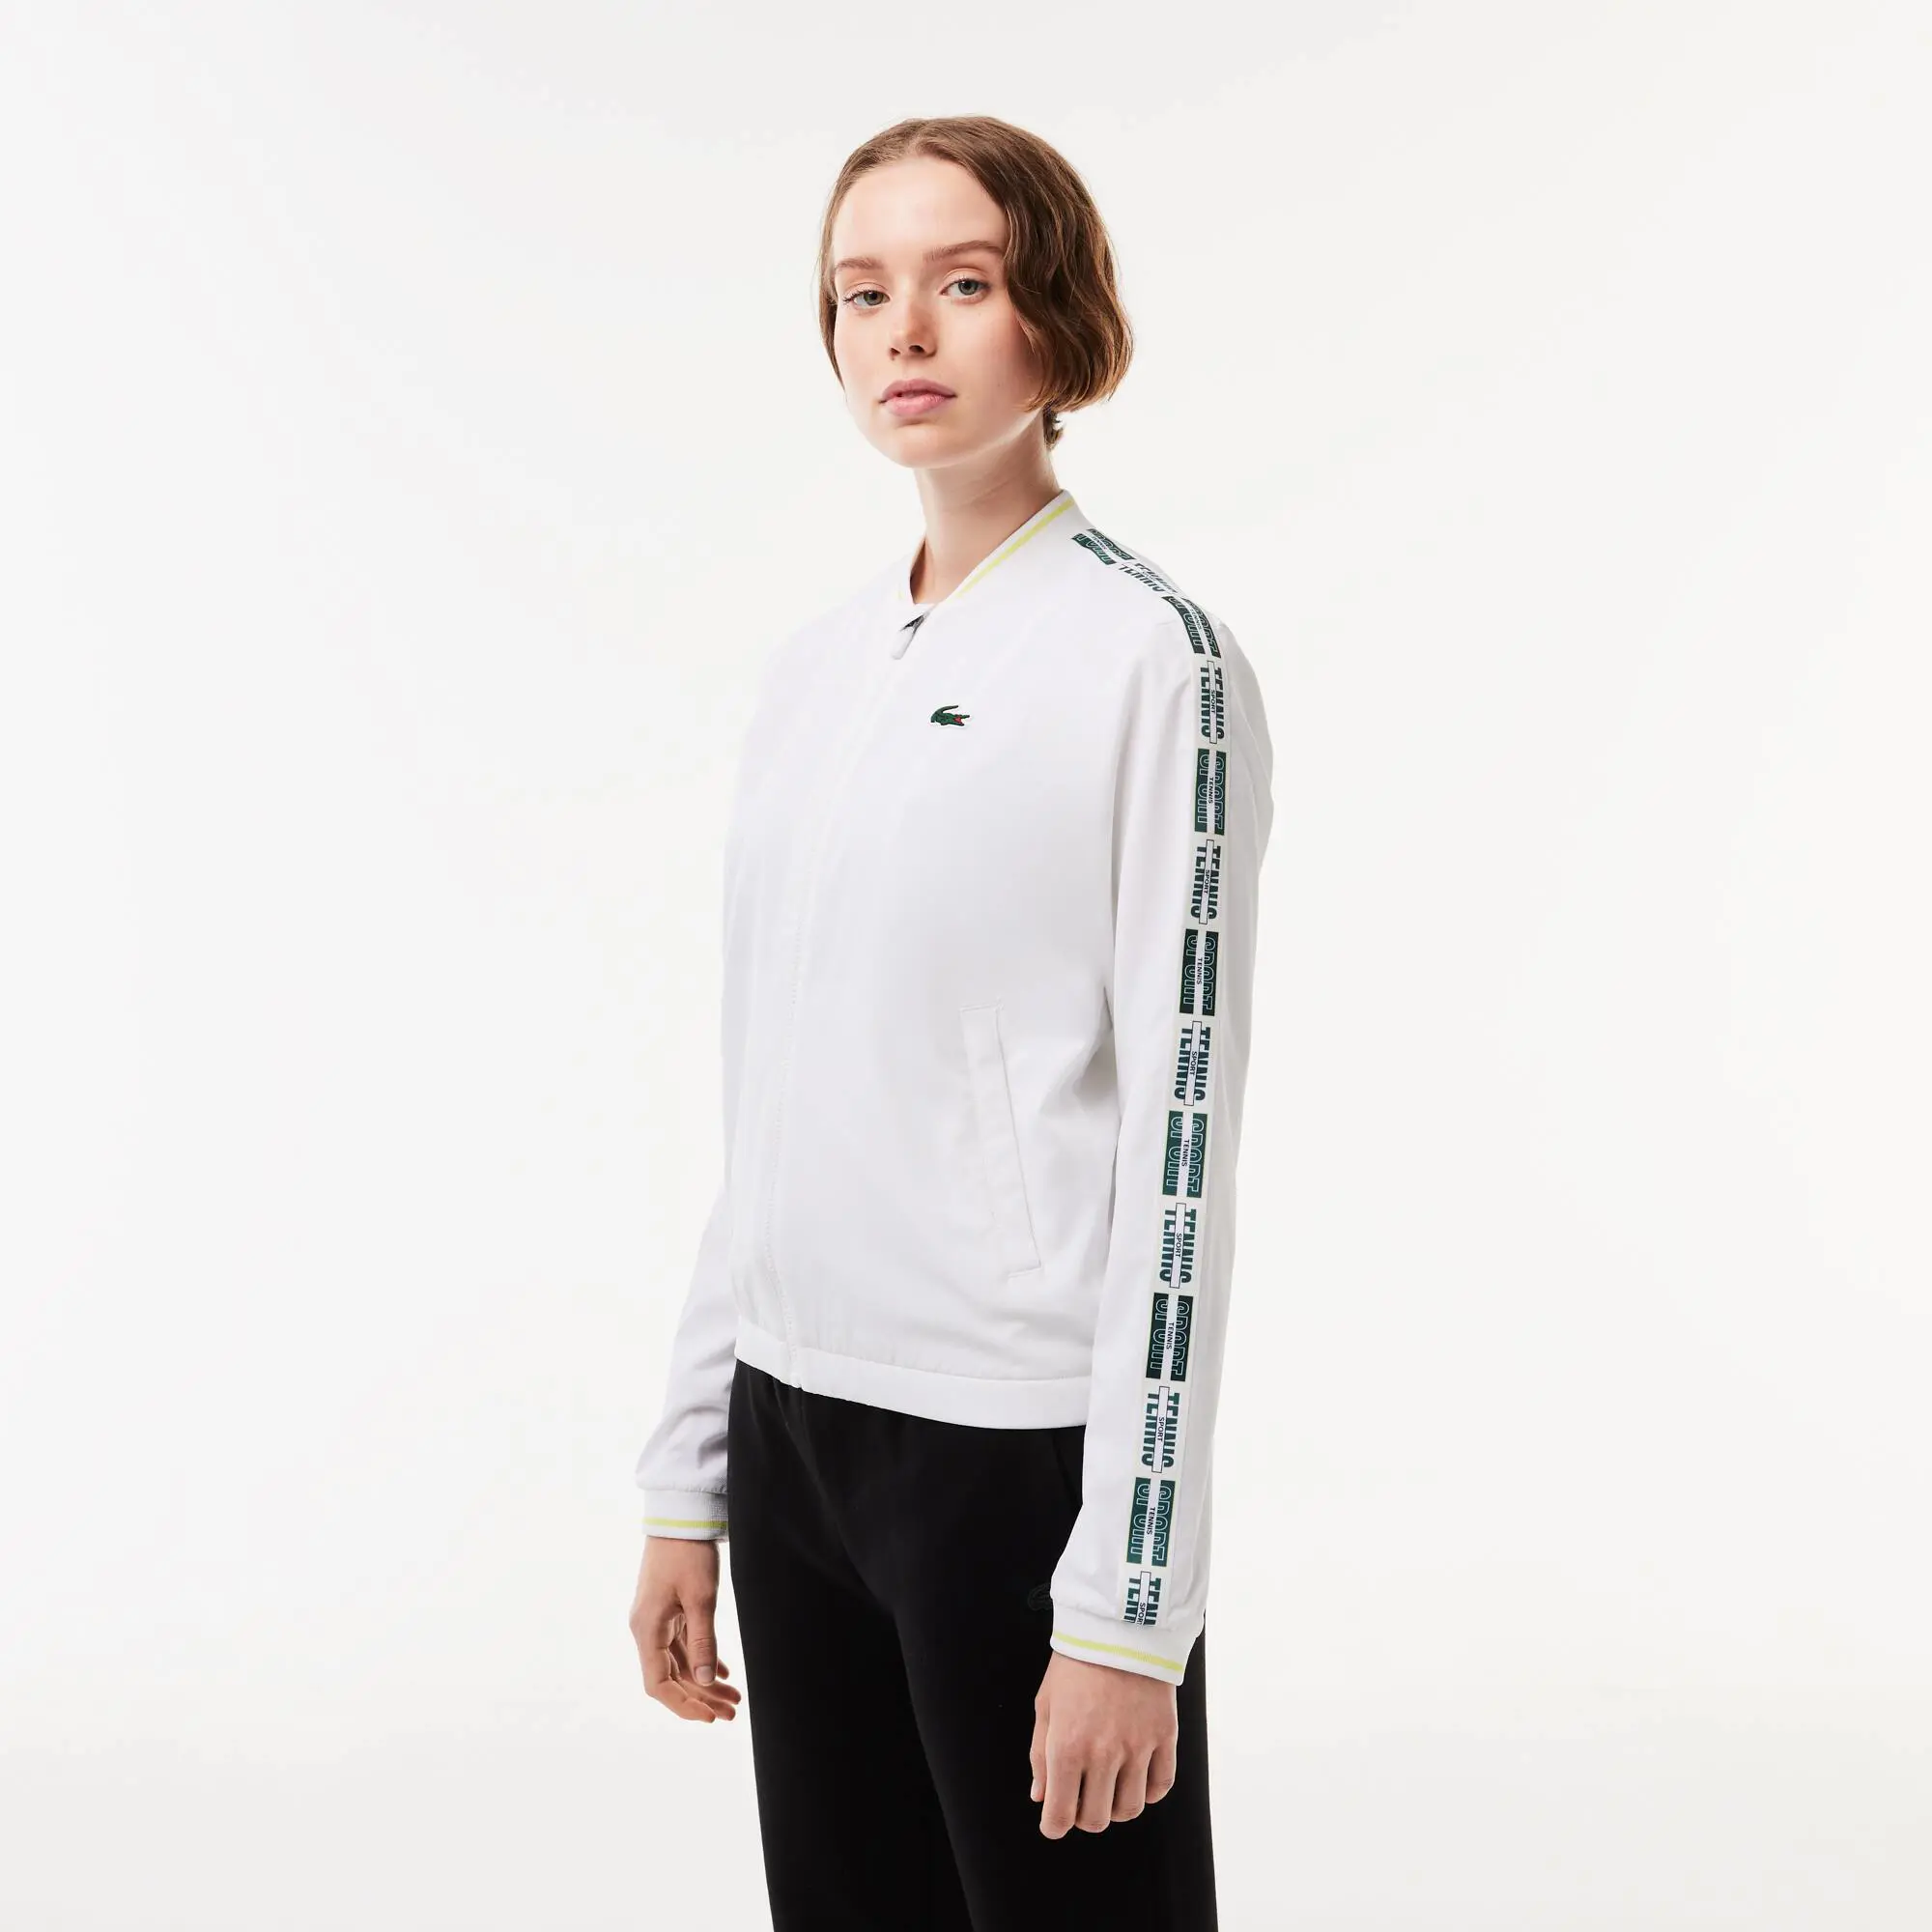 Lacoste Recycled Fiber Stretch Tennis Jacket. 1